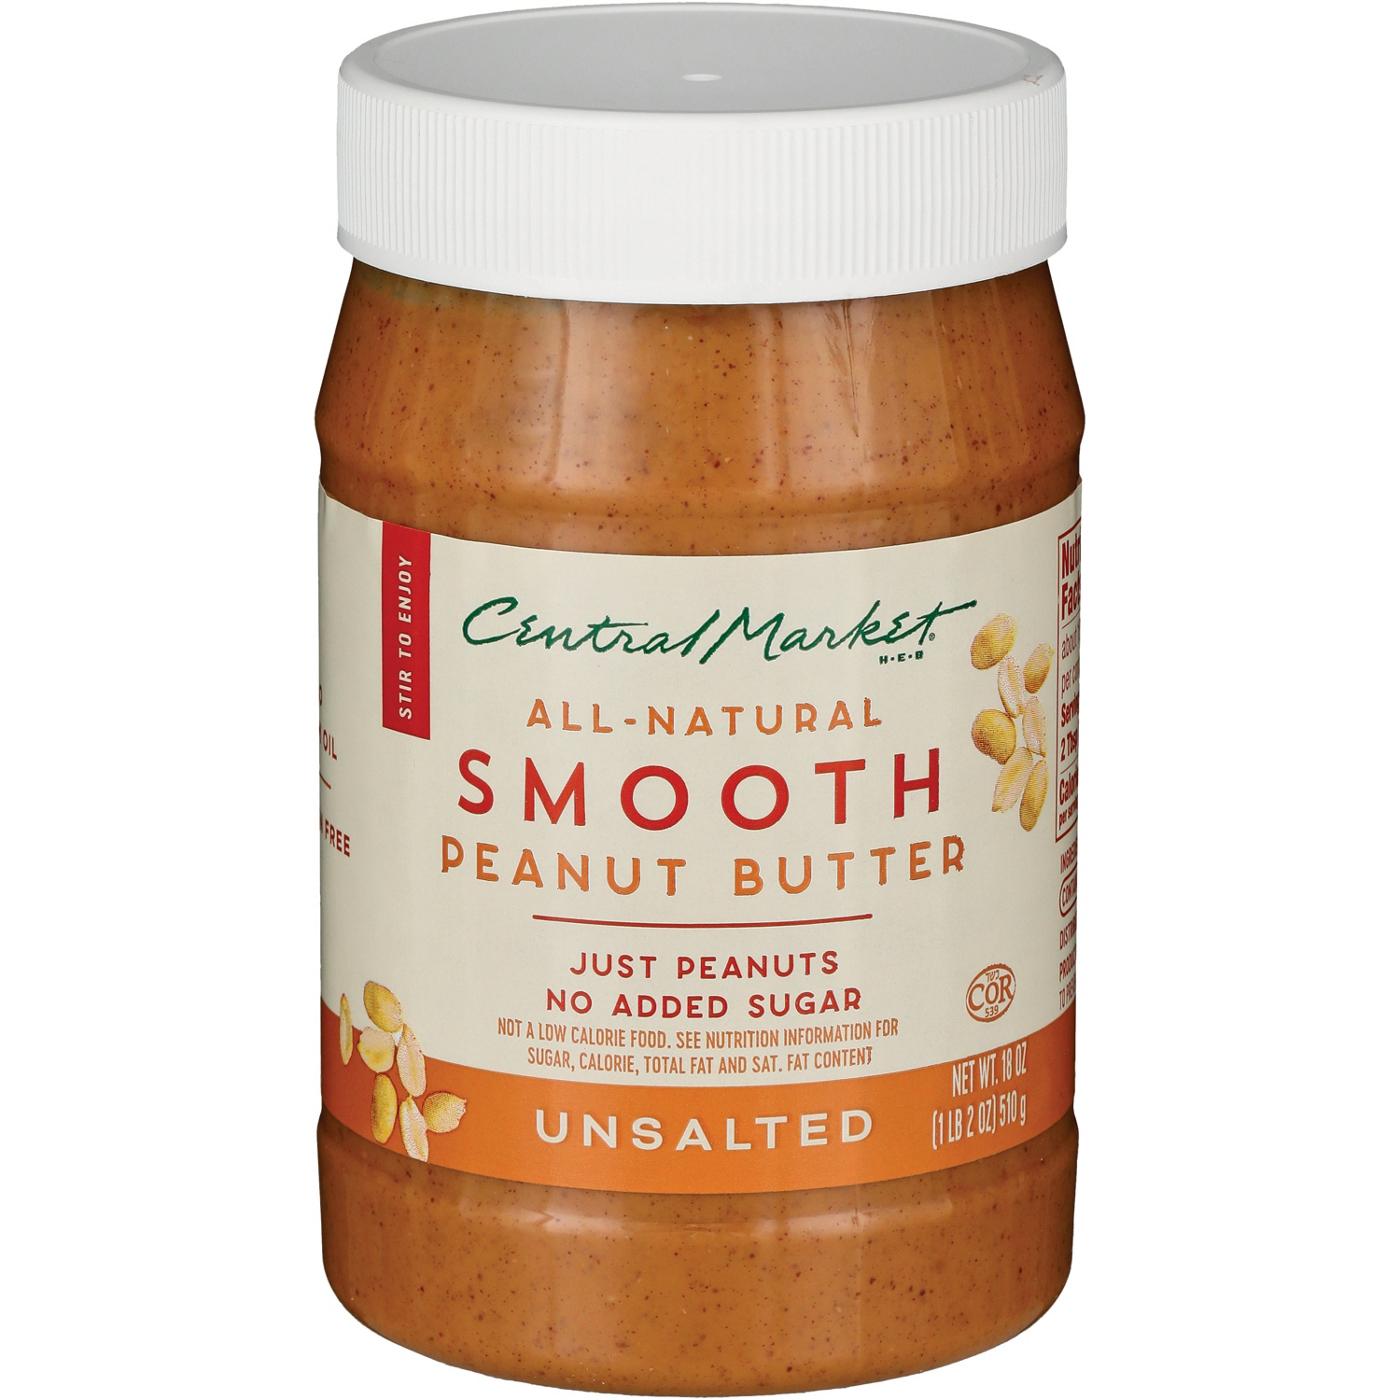 Central Market All-Natural Smooth Peanut Butter - Unsalted; image 2 of 2